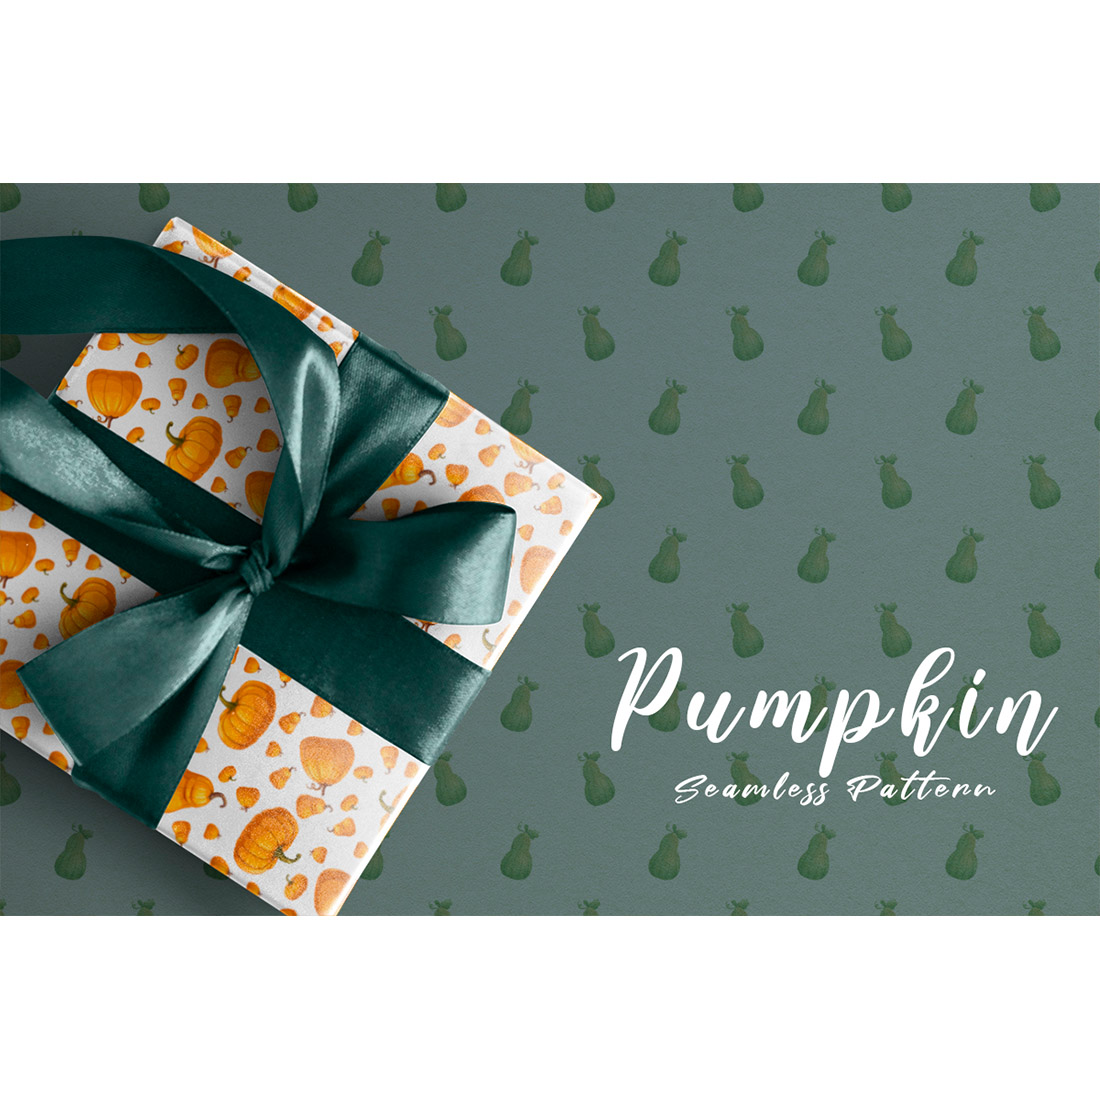 Image of wrapping paper with exquisite pumpkin patterns